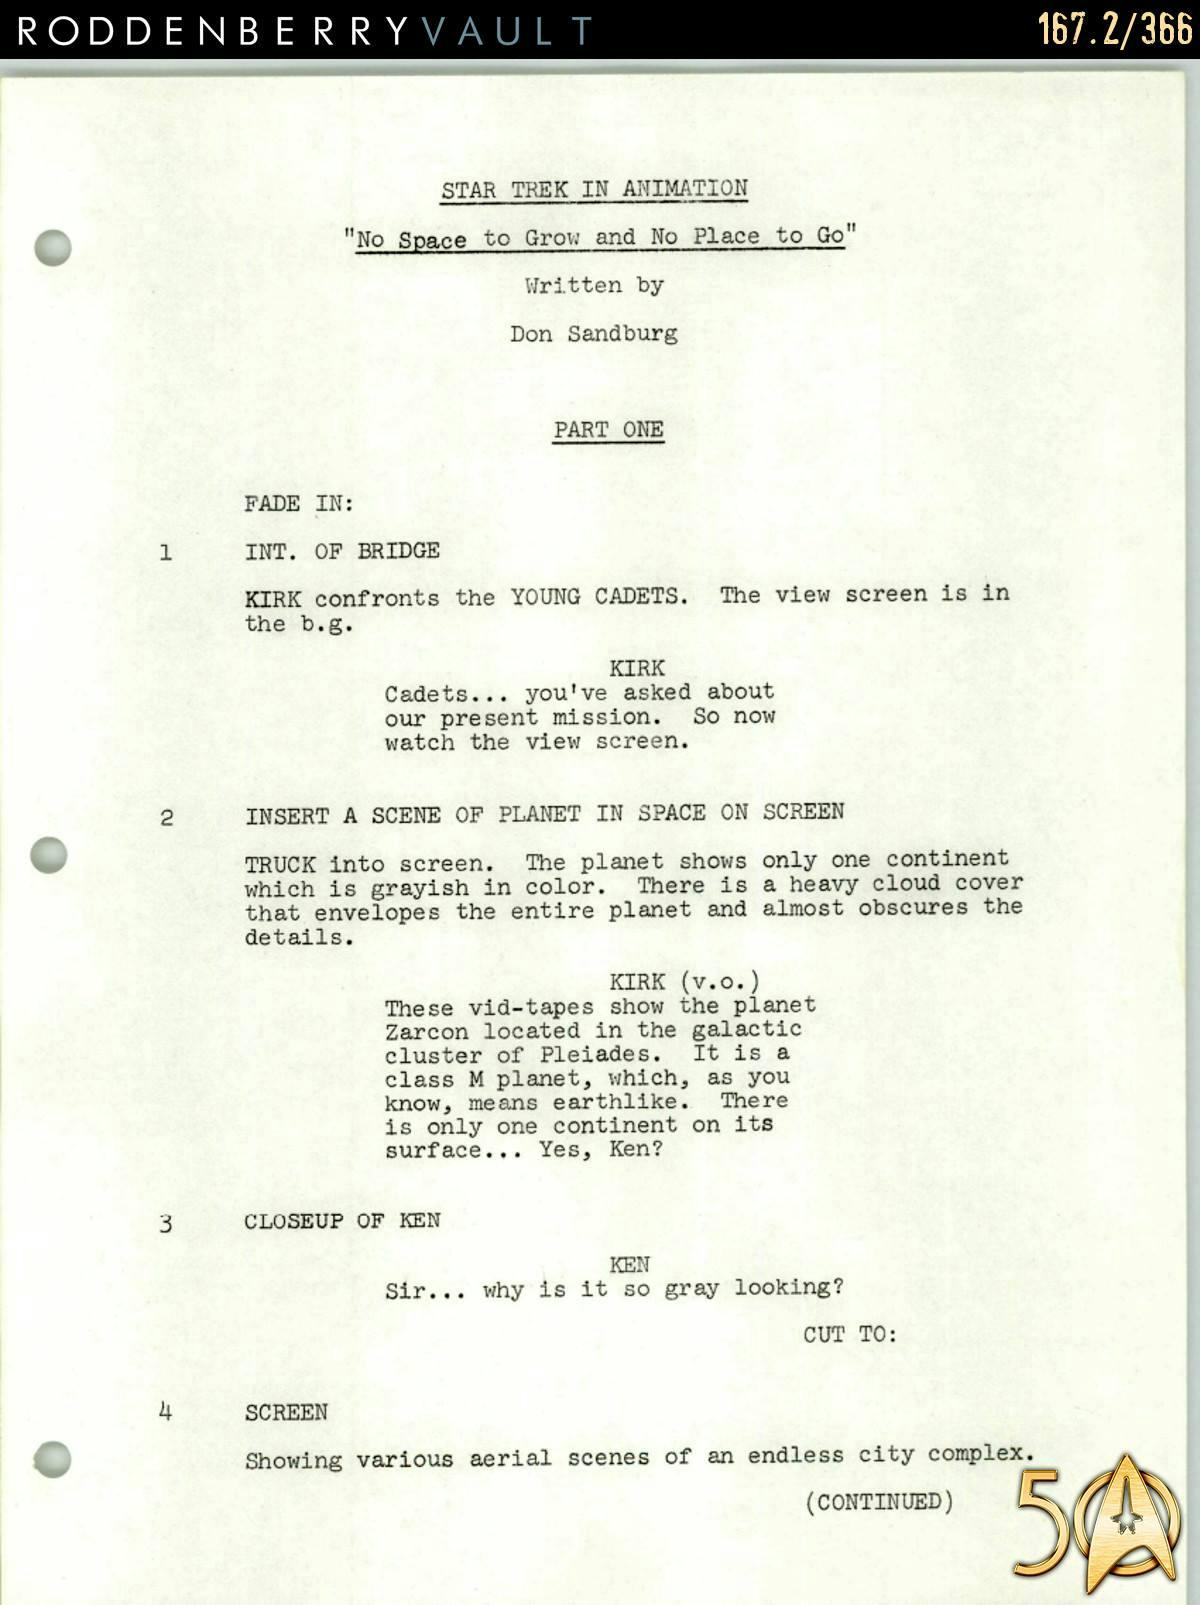 From the Roddenberry 366 Vault - The Animated Series - (unproduced) 'No Space to Grow and No Place to Go' script written by Don Sandburg